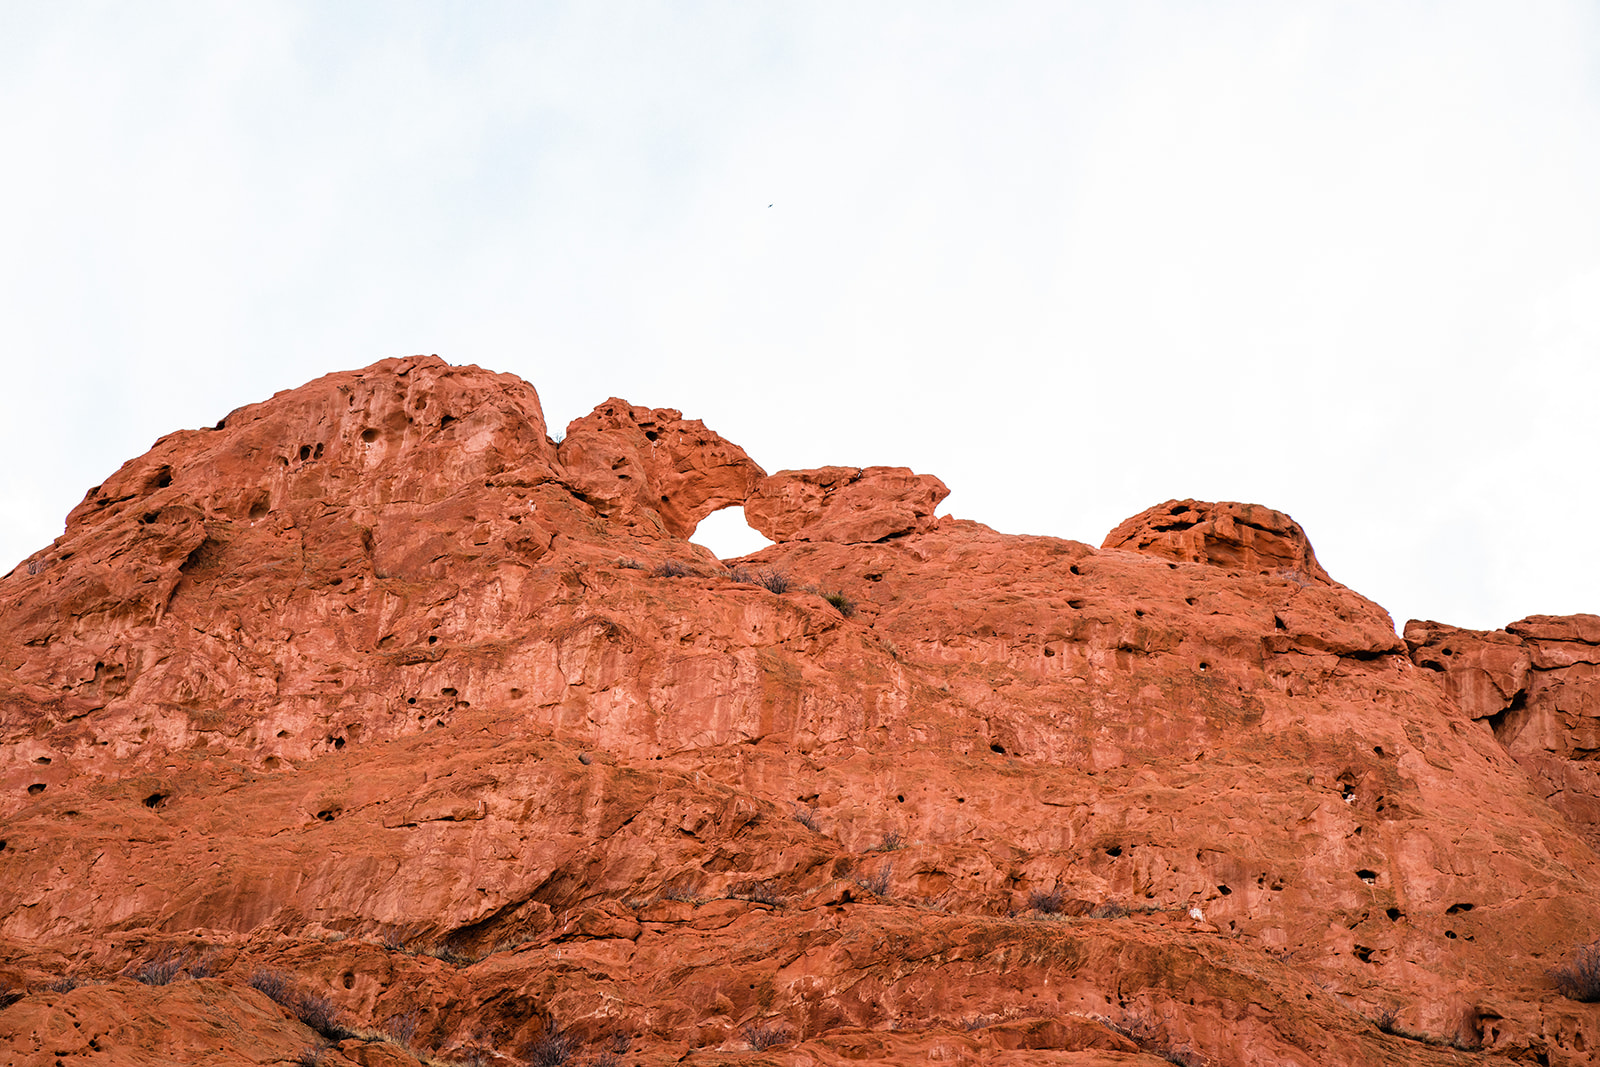 An iconic landmark in Garden of the Gods called Kissing Camels, which is a towering and vibrant red rock formation that resembles the faces of two camels kissing one another.